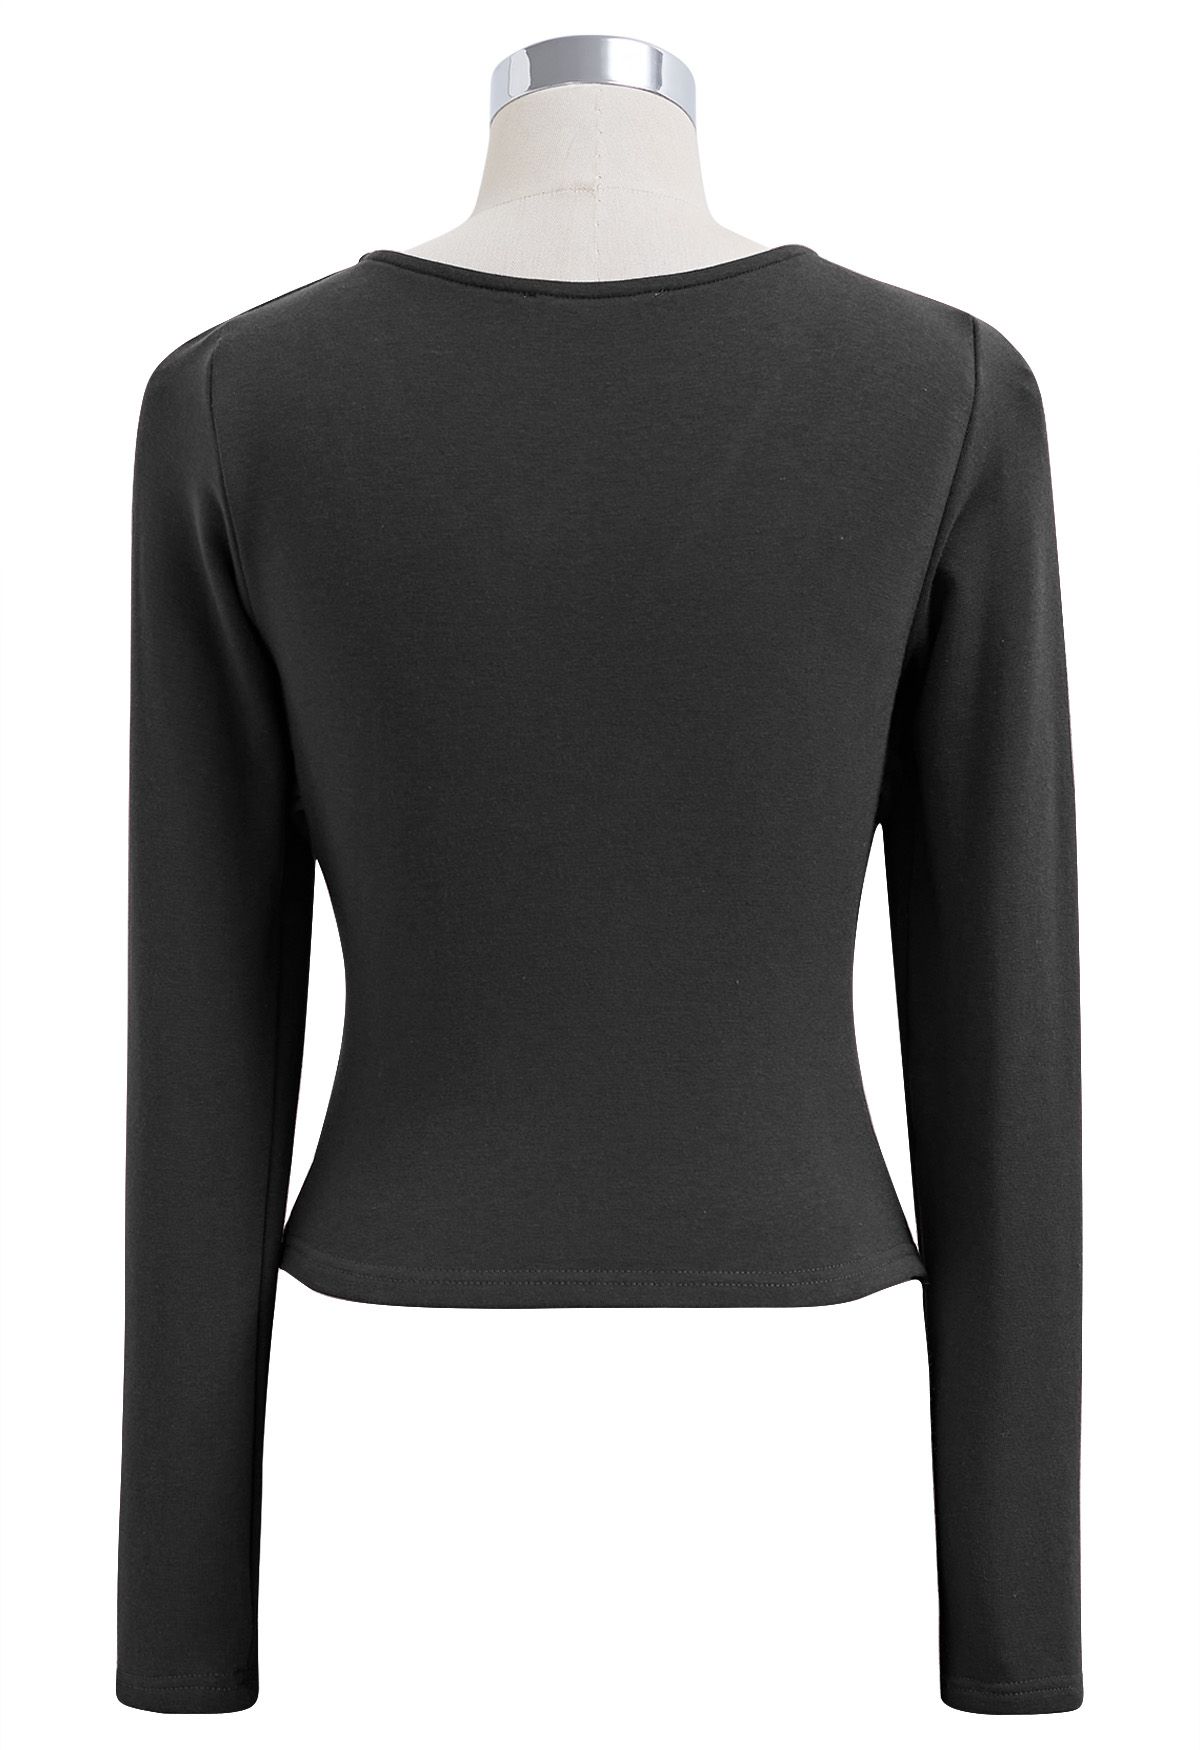 Cross V-Neck Long Sleeves Top in Smoke - Retro, Indie and Unique Fashion